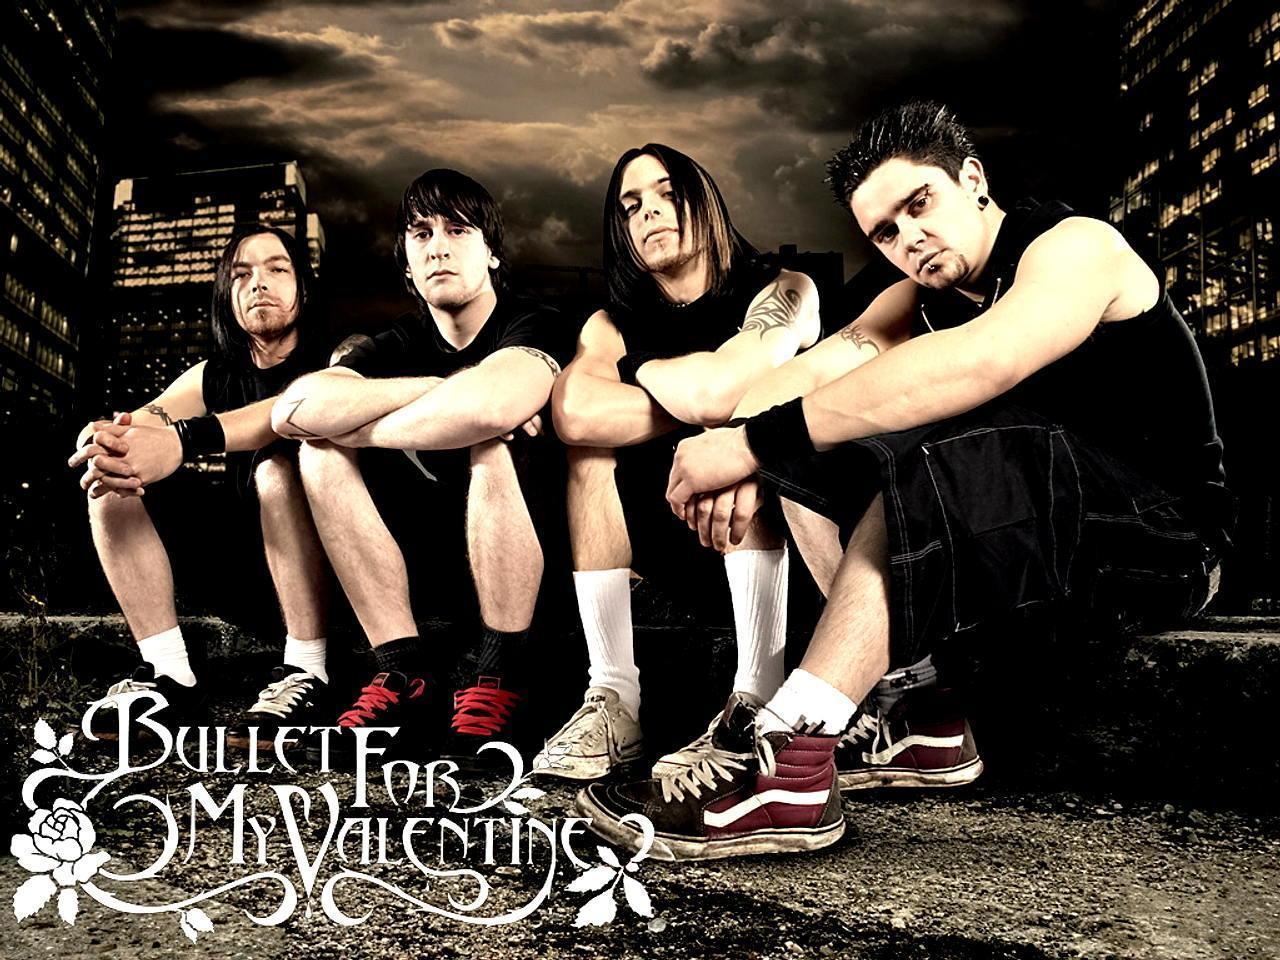 Bullet for My Valentine Wallpaper. Music Wallpaper Gallery. PC